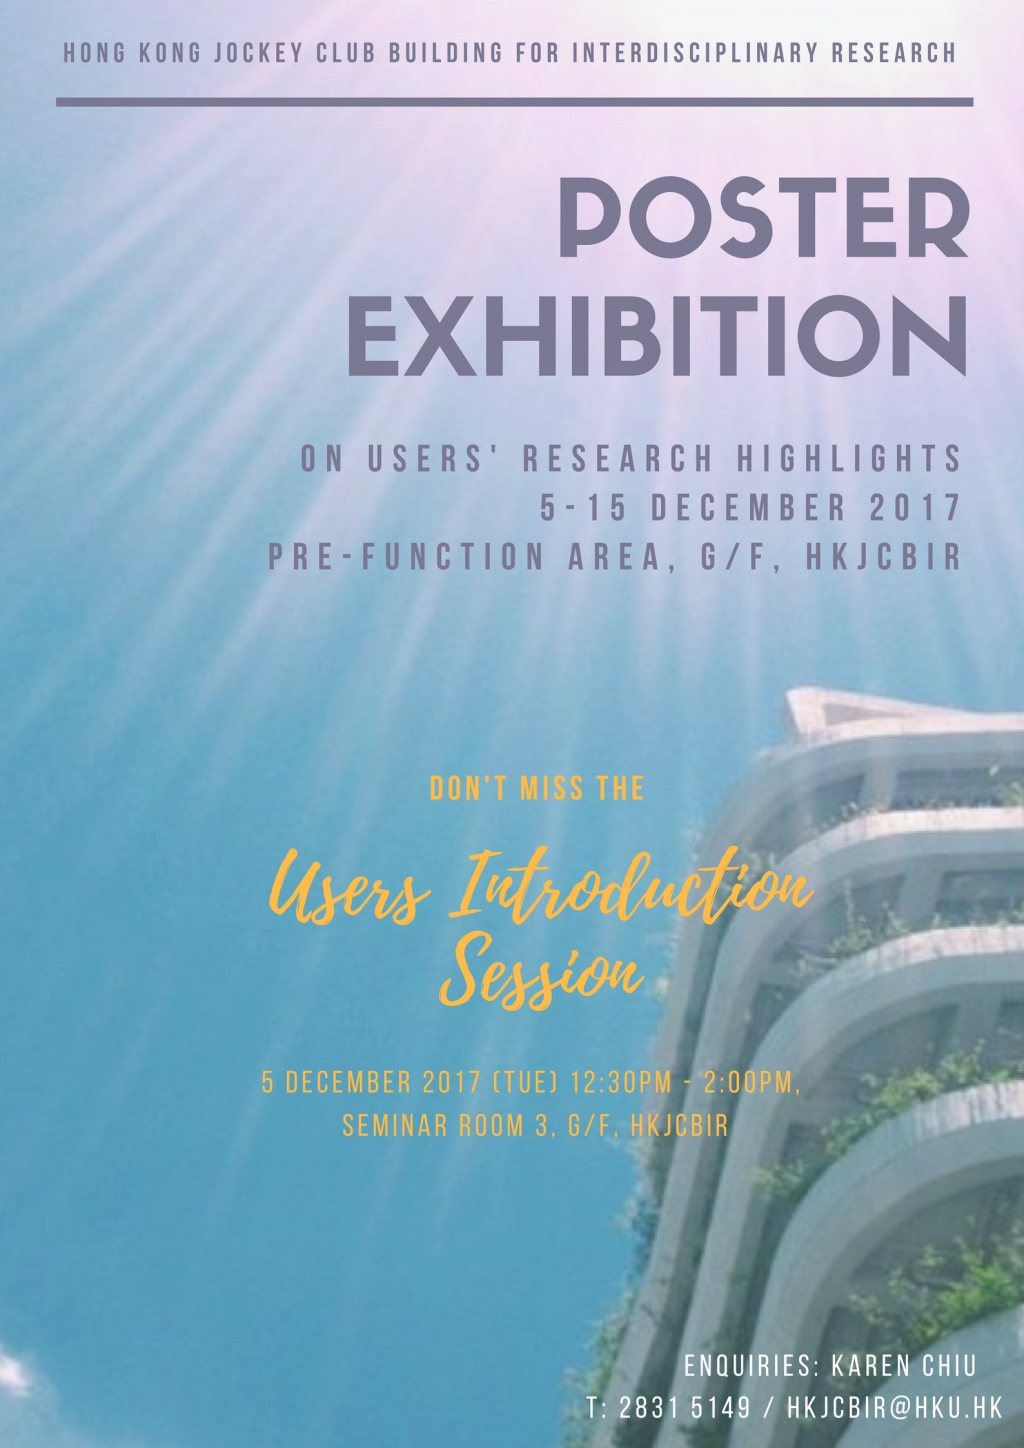 First Poster Exhibition, HKJCBIR welcomes you!